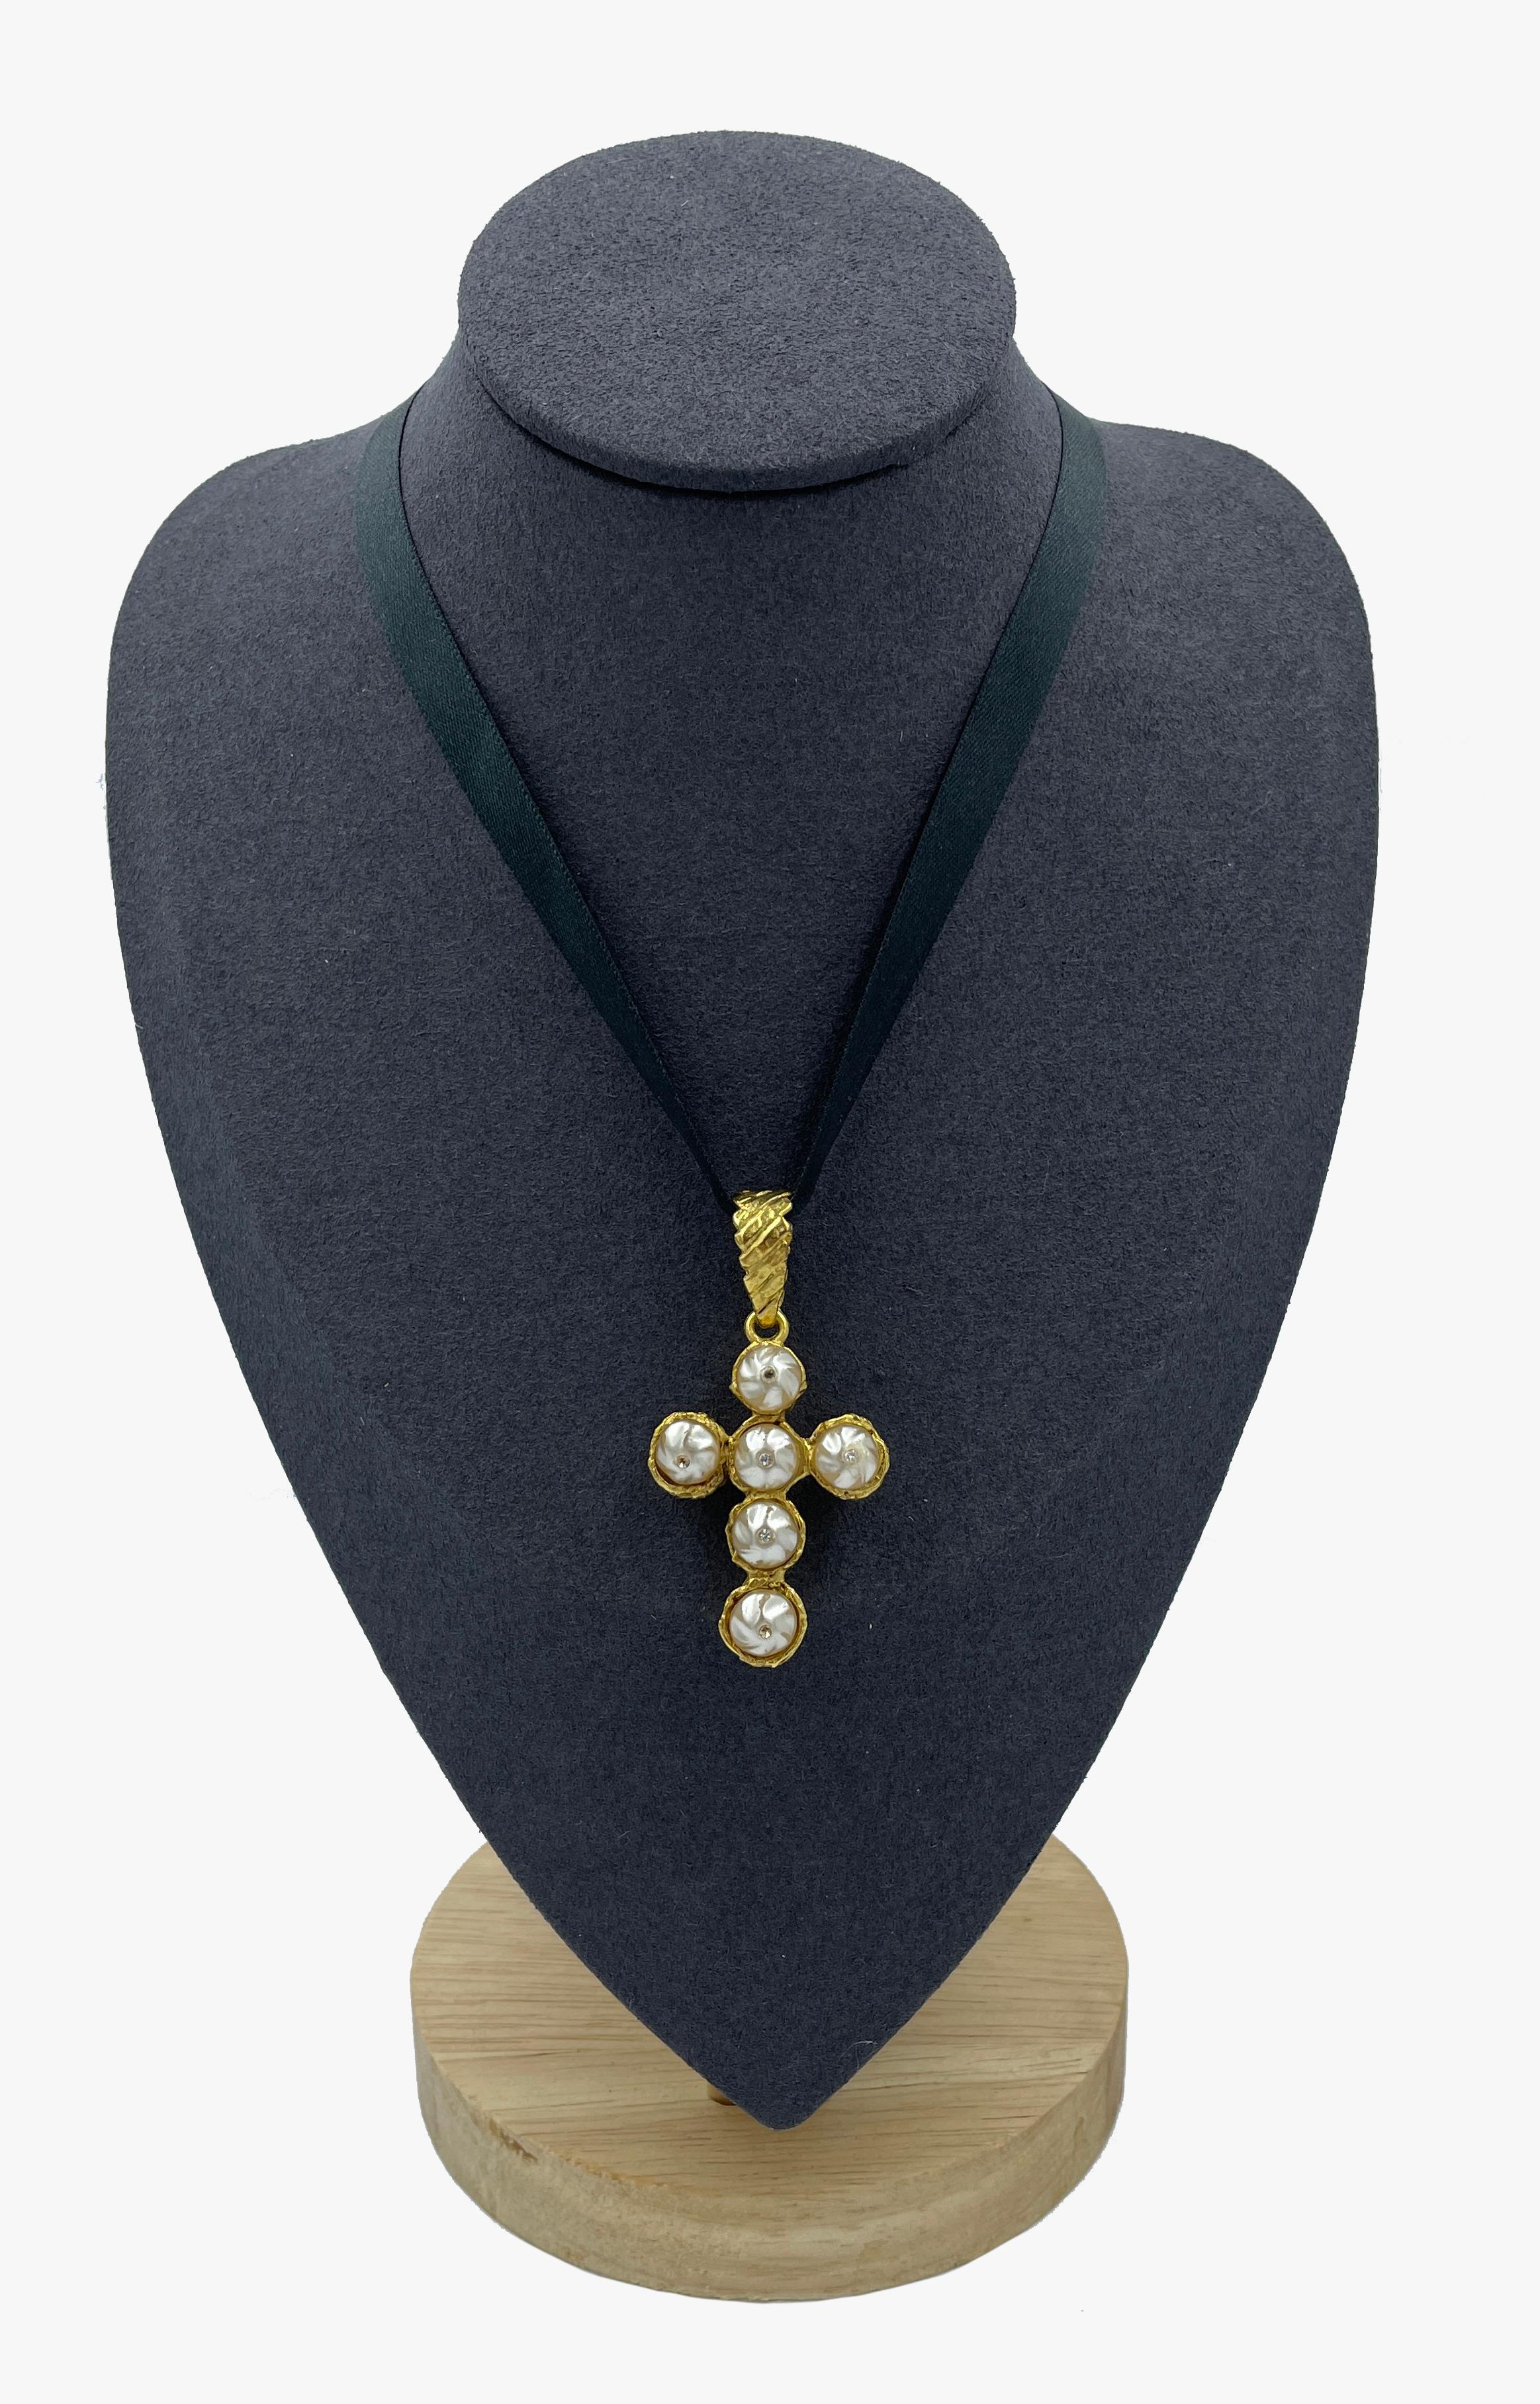 Vintage Christian Lacroix gold tone cross embellished with artificial baroque pearls and rhinestones. 
Early 1990s
Can be worn as a pendant by clipping onto choker or chain
Cross length  – 4,5 cm 
Total length – 5,3 cm 
Signed
(!) Black choker